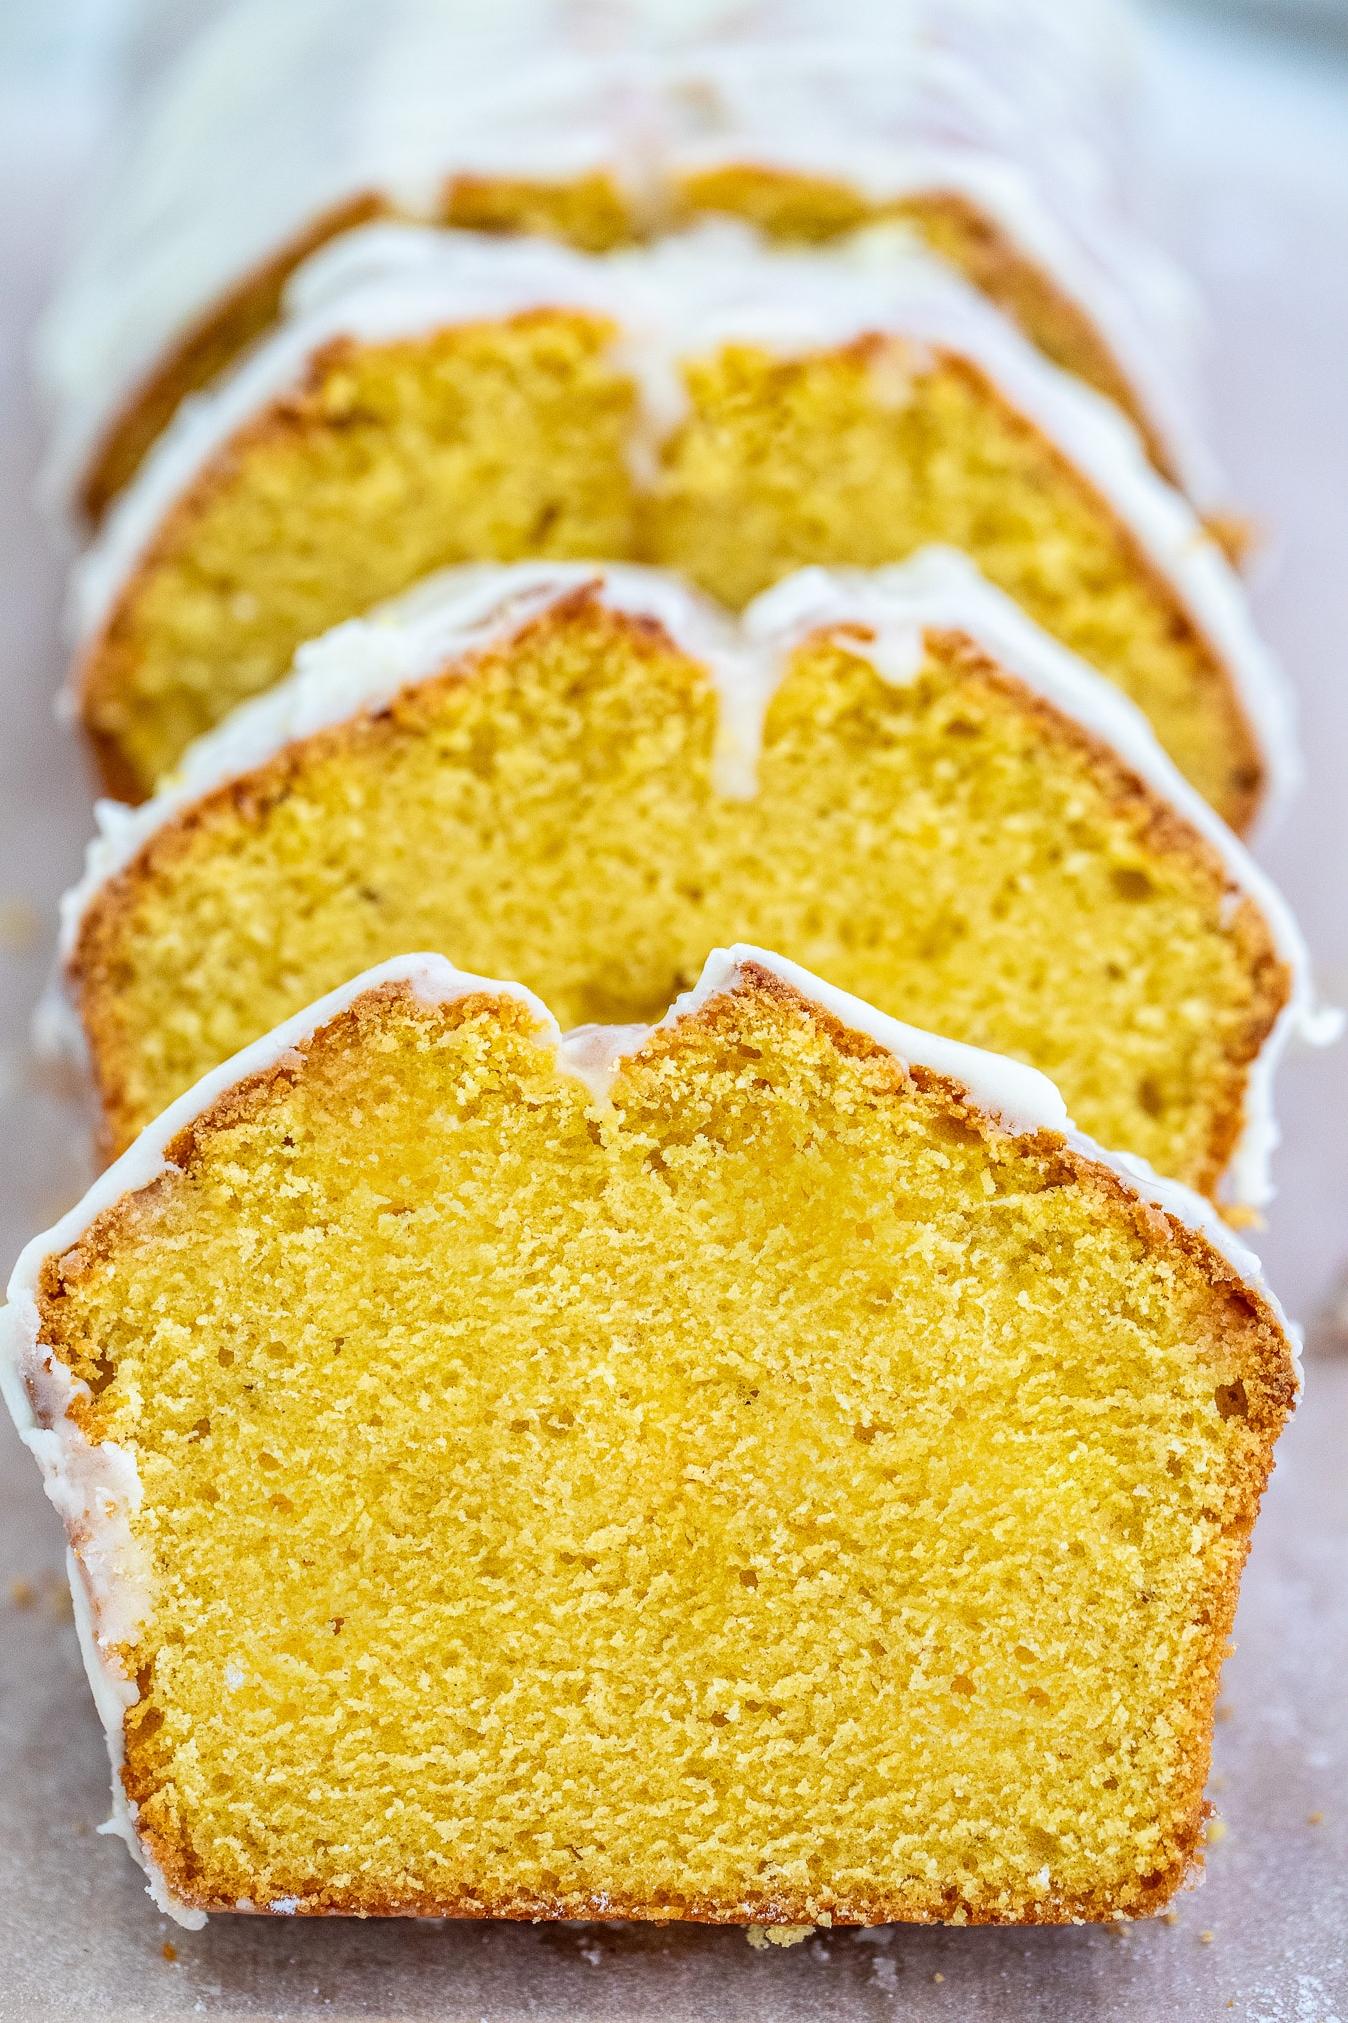  Who needs pumpkin pie when you can have Pumpkin Pound Cake?